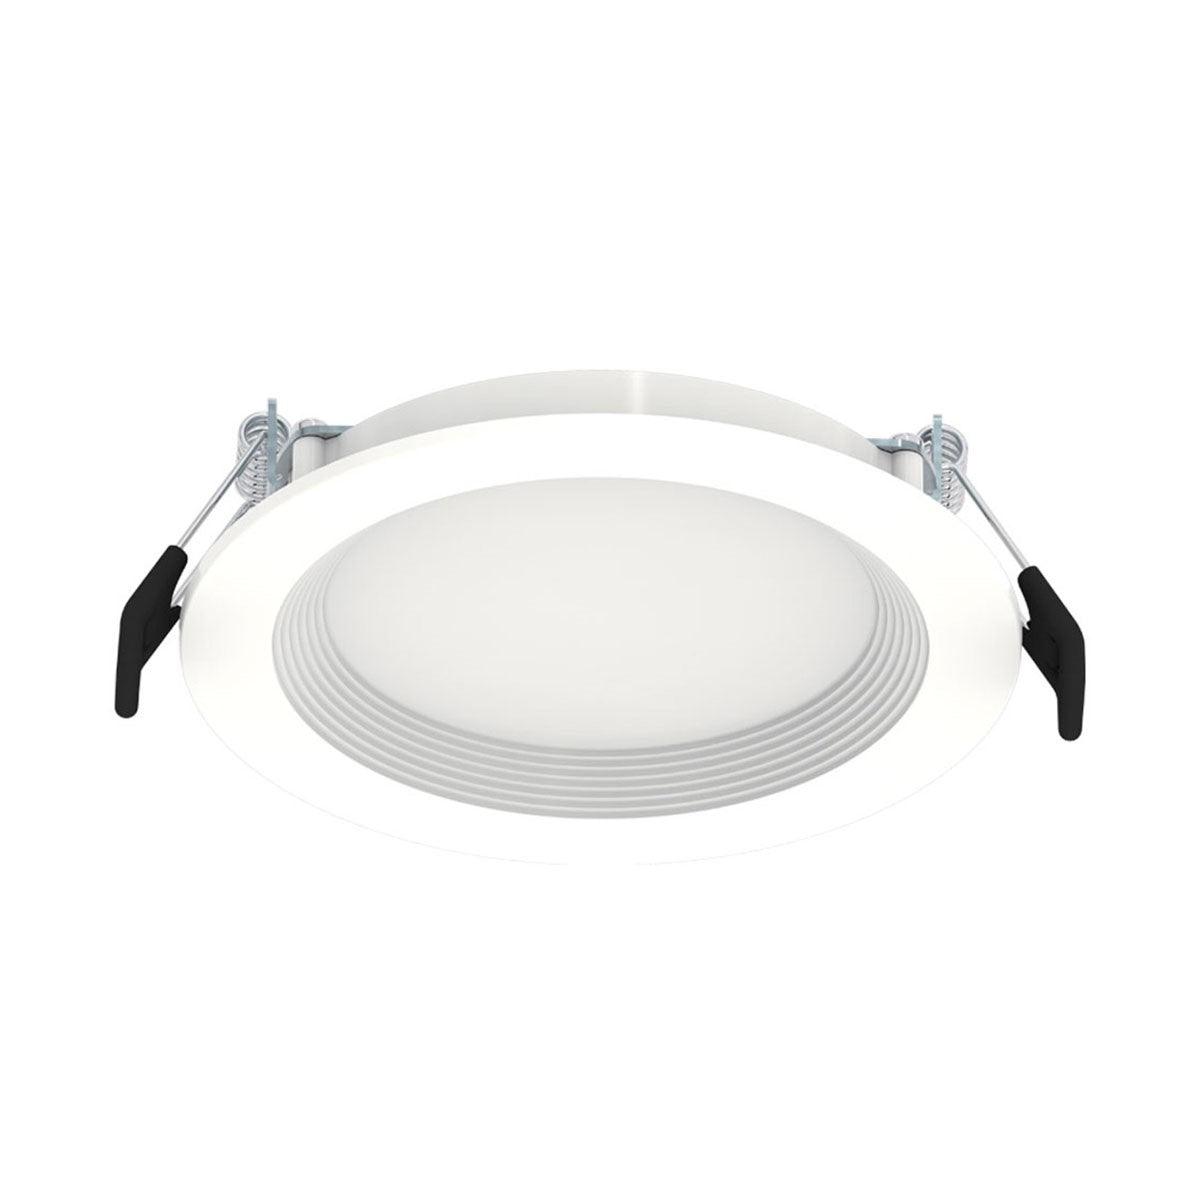 6 In. Edge-Lit Wafer Canless LED Recessed Light, 13 Watt, 1100 Lumens, Selectable CCT, 2700K to 5000K, Baffle Trim